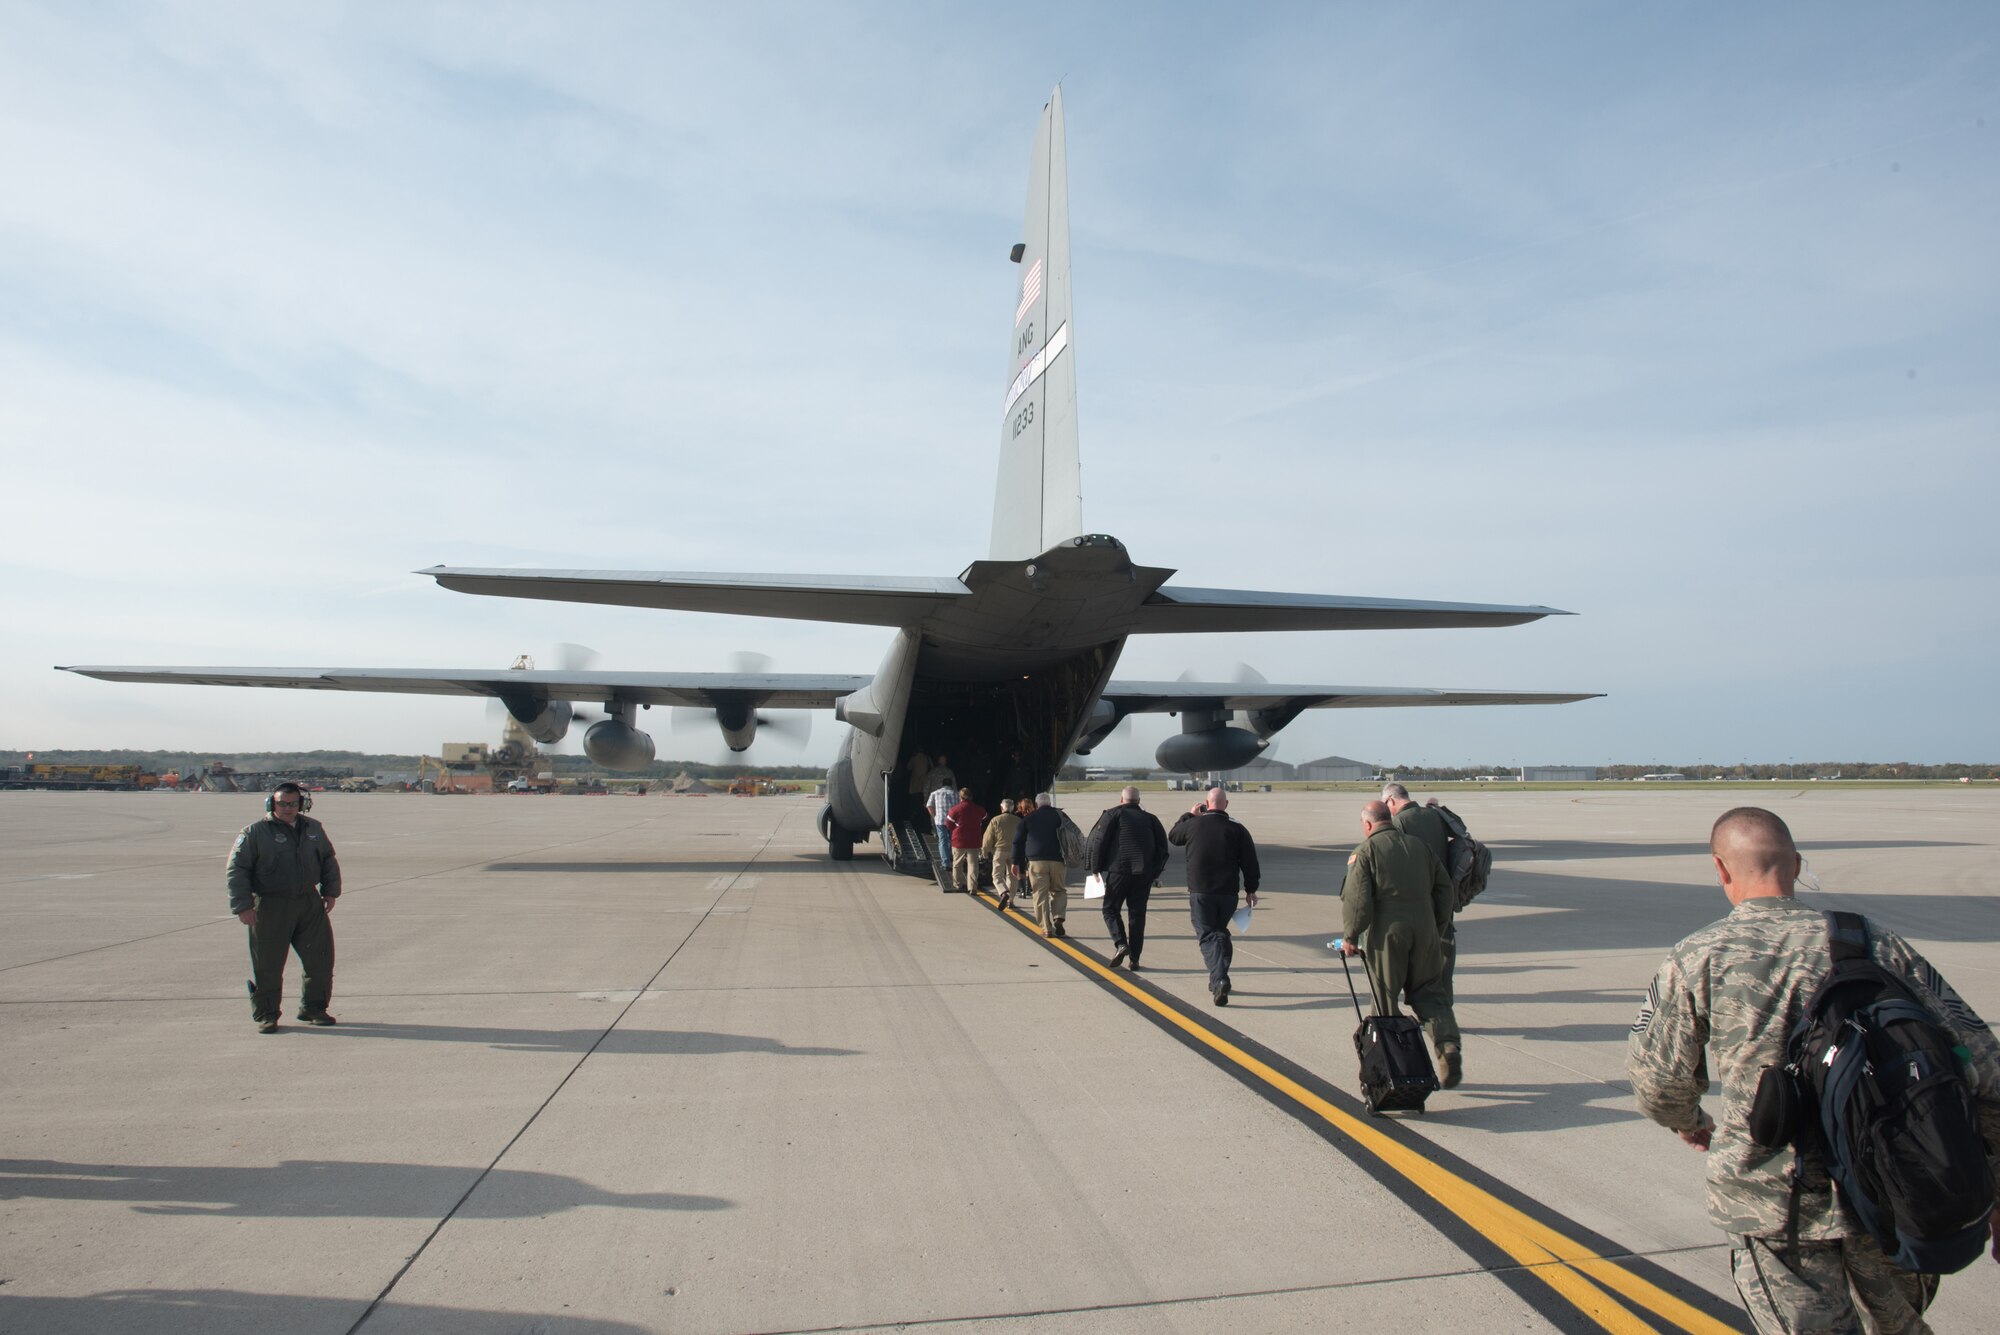 Civilian employers board a 123rd Airlift Wing C-130 Hercules aircraft at Wright-Patterson Air Force Base, Ohio, Oct. 26, 2016, as part of an Employer Support of the Guard and Reserve “Bosslift.” The employers were participating in an orientation flight which began at the Kentucky Air National Guard Base in Louisville, Ky., and was one component in a day of activities designed to enhance their understanding of the wing’s mission and the work their employees do when serving as reservists in the Kentucky Air Guard. (U.S. Air National Guard photo by Master Sgt. Phil Speck)